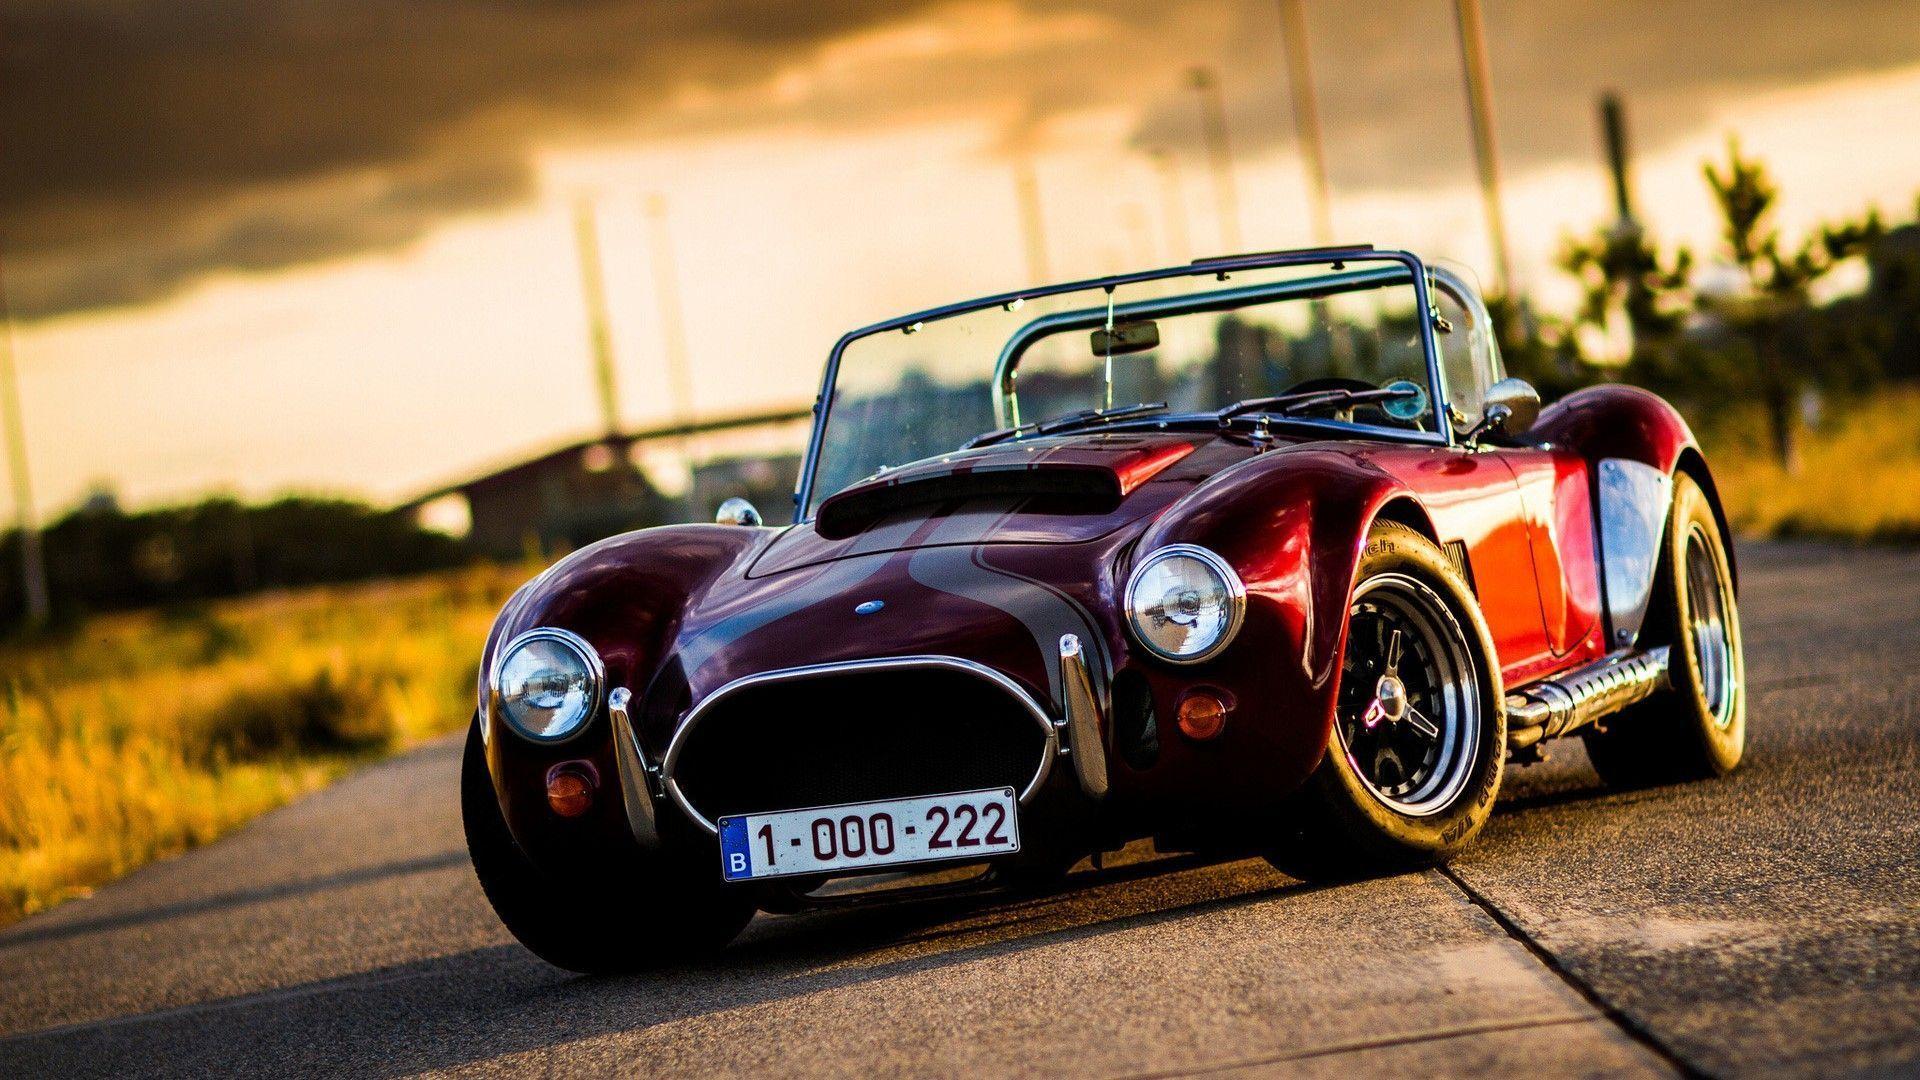 Fantastic Red Shelby Cobra Wallpaper 44662 1920x1080 px